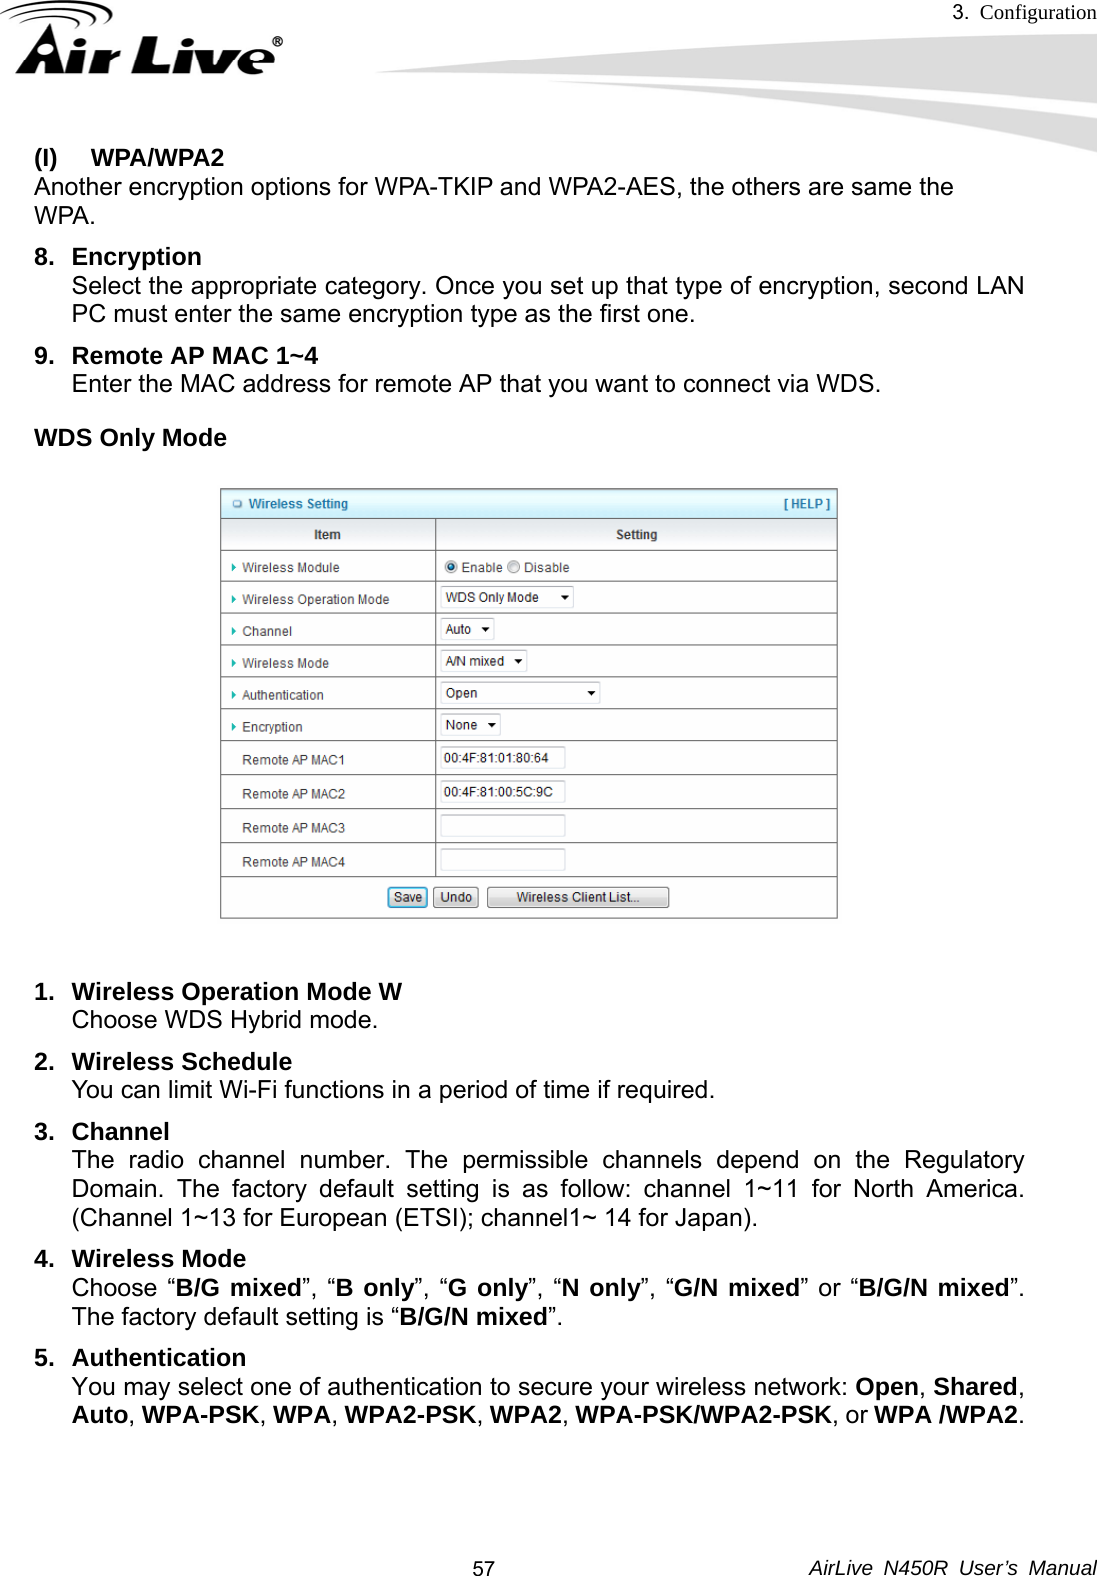 3.  Configuration     AirLive N450R User’s Manual  57(I) WPA/WPA2  Another encryption options for WPA-TKIP and WPA2-AES, the others are same the   WPA.  8. Encryption Select the appropriate category. Once you set up that type of encryption, second LAN PC must enter the same encryption type as the first one. 9.  Remote AP MAC 1~4 Enter the MAC address for remote AP that you want to connect via WDS. WDS Only Mode  1.  Wireless Operation Mode W  Choose WDS Hybrid mode. 2. Wireless Schedule You can limit Wi-Fi functions in a period of time if required. 3. Channel The radio channel number. The permissible channels depend on the Regulatory Domain. The factory default setting is as follow: channel 1~11 for North America. (Channel 1~13 for European (ETSI); channel1~ 14 for Japan). 4. Wireless Mode Choose “B/G mixed”, “B only”, “G only”, “N only”, “G/N mixed” or “B/G/N mixed”. The factory default setting is “B/G/N mixed”. 5. Authentication  You may select one of authentication to secure your wireless network: Open, Shared, Auto, WPA-PSK, WPA, WPA2-PSK, WPA2, WPA-PSK/WPA2-PSK, or WPA /WPA2.    